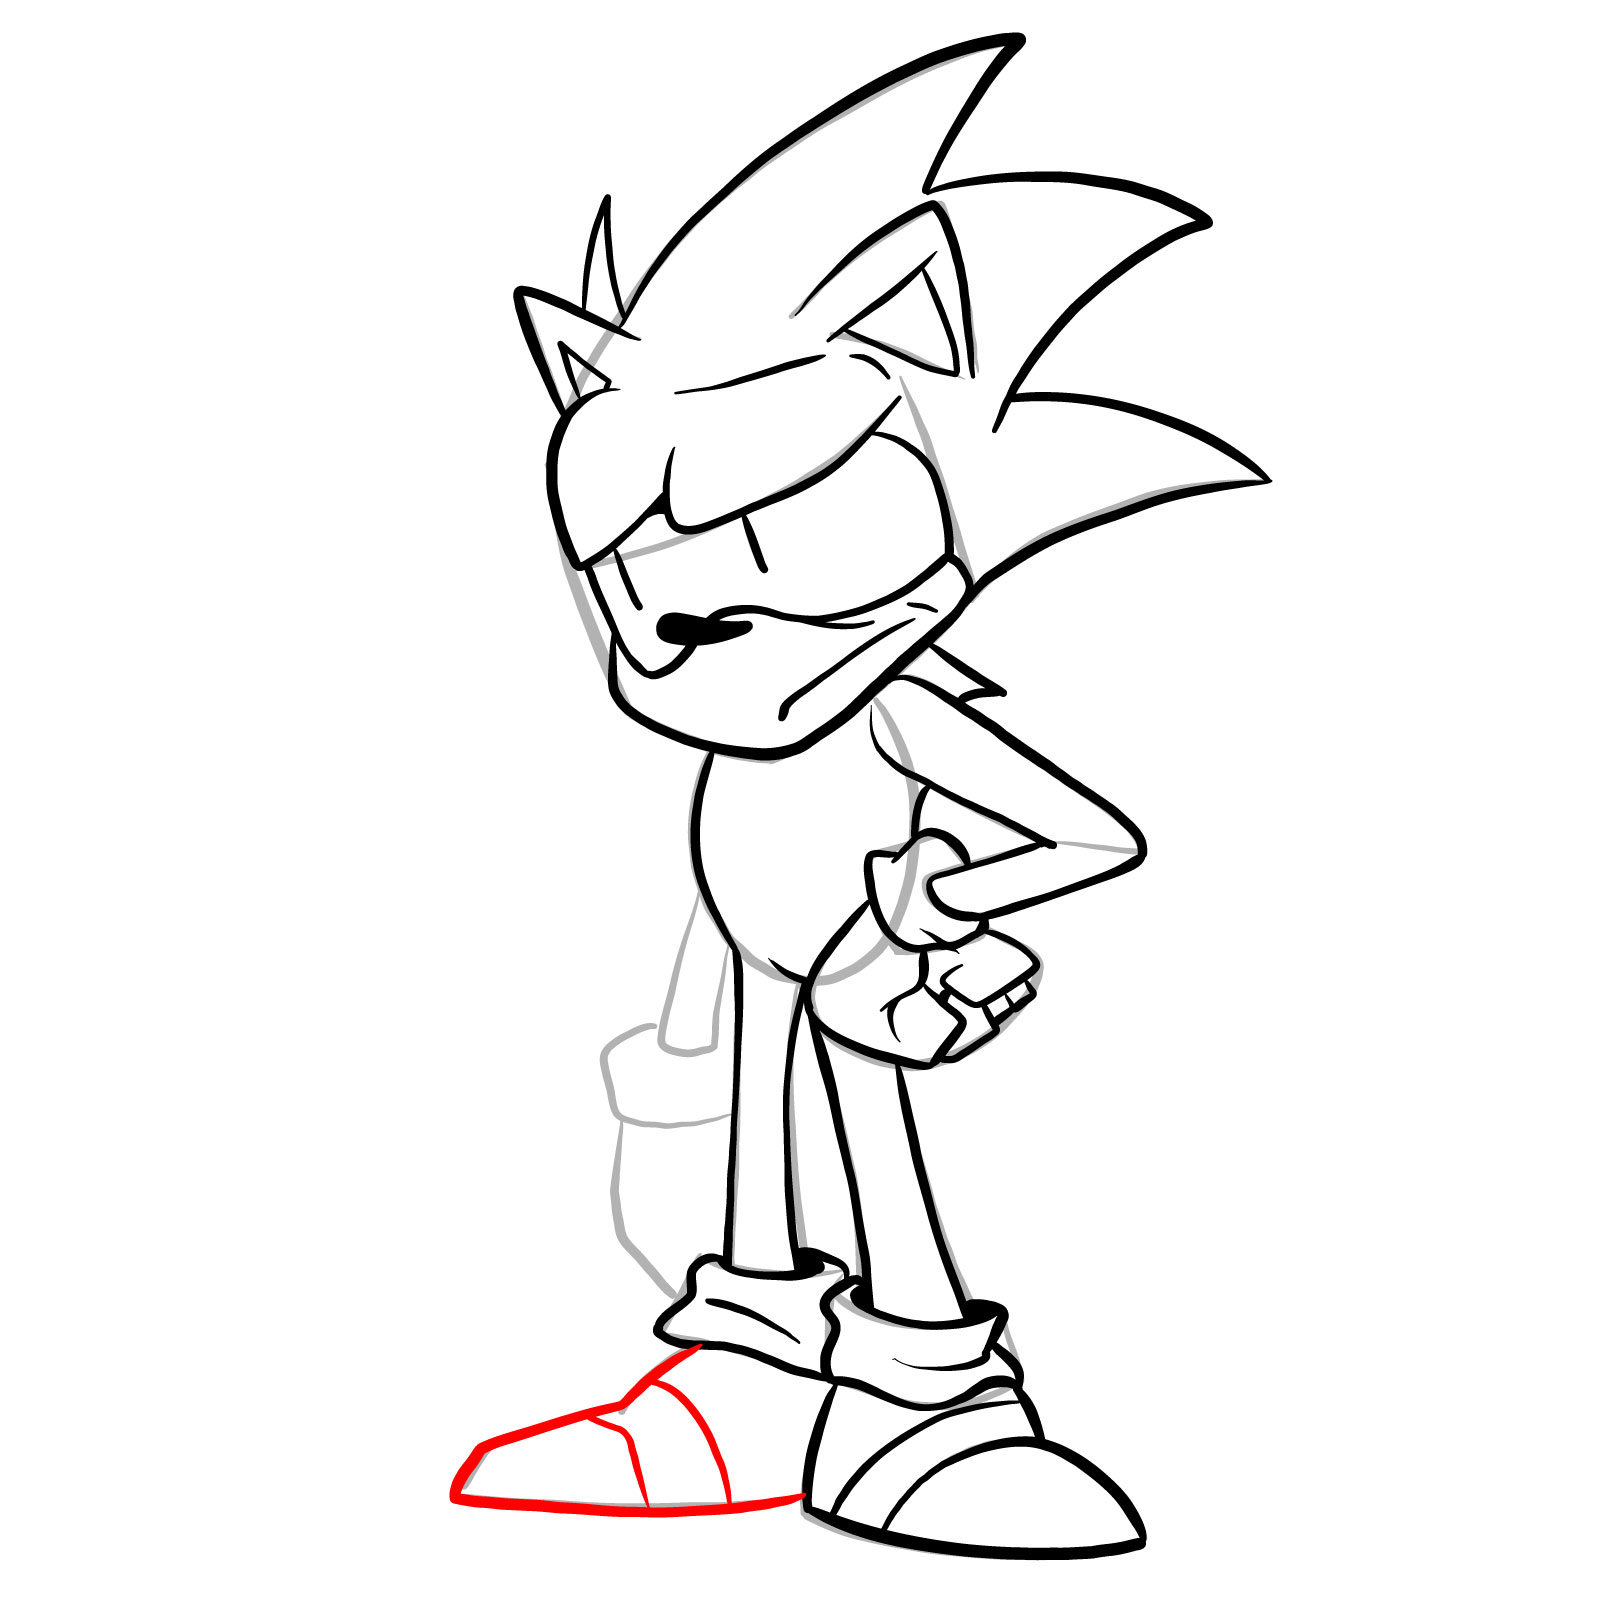 How to draw Sonic - FNF: Secret Histories - step 24